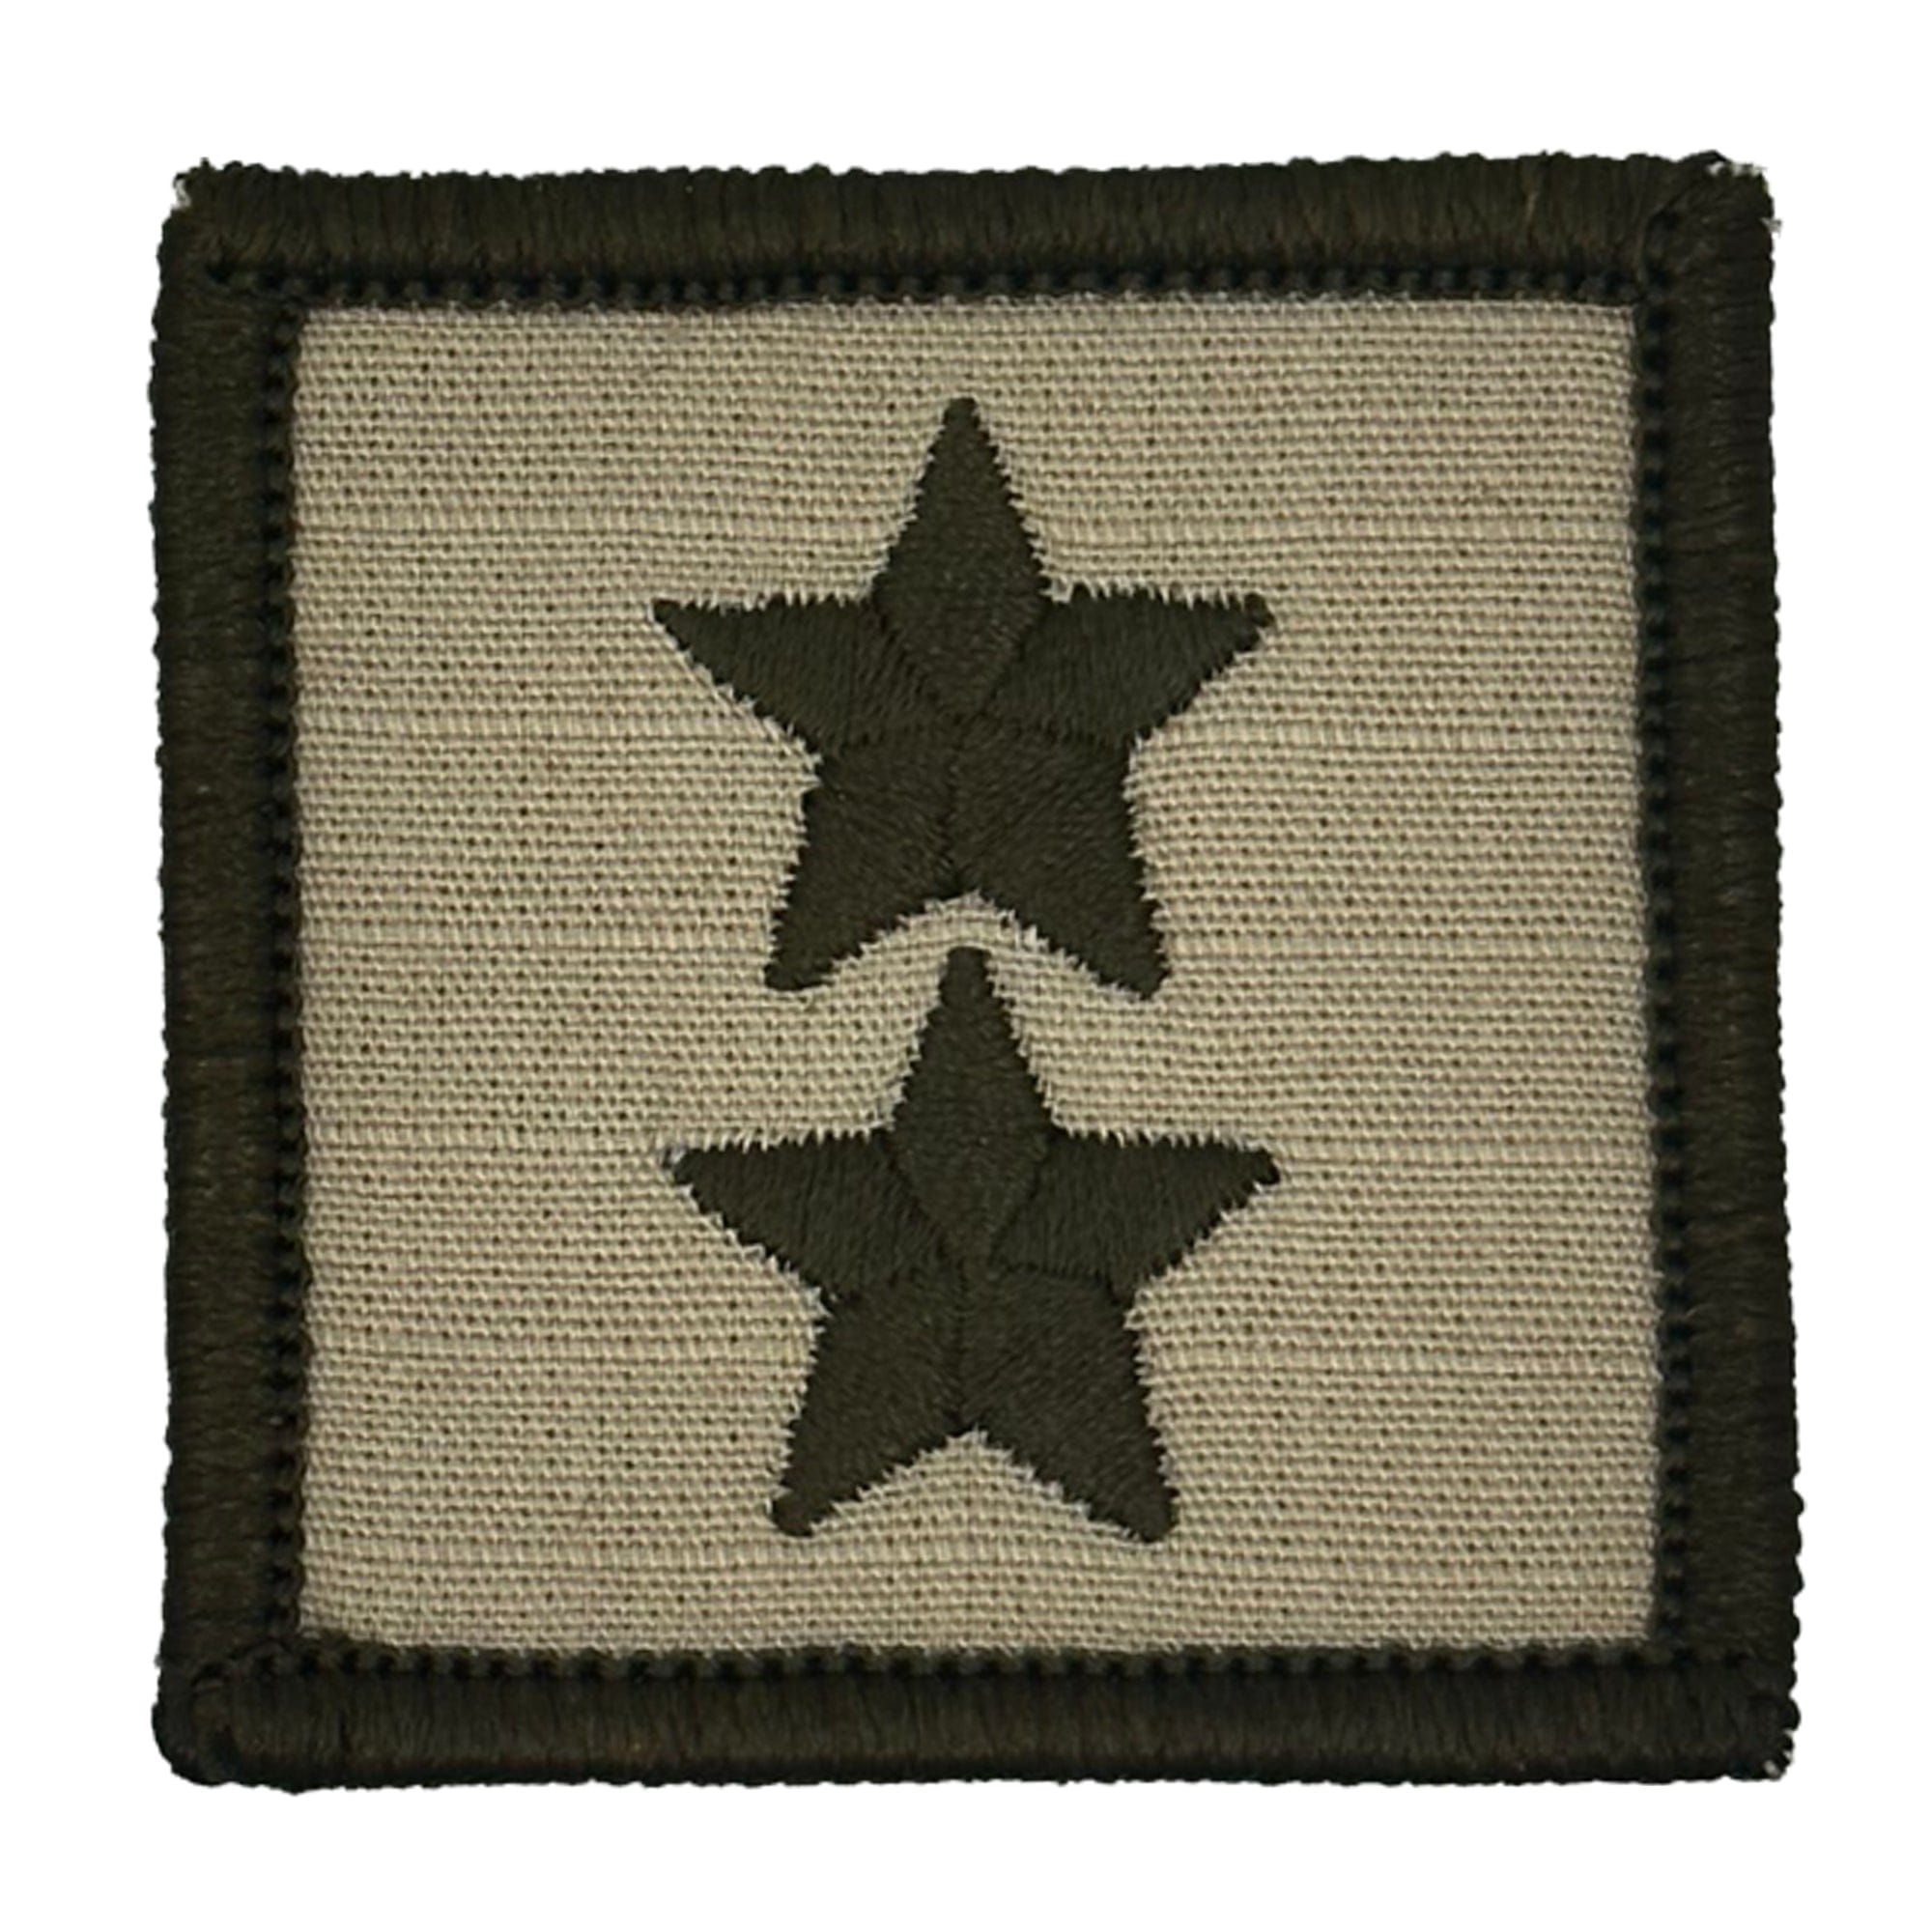 Tactical Gear Junkie Patches Desert Sand / Major General USMC Rank Insignia - 2x2 Patch